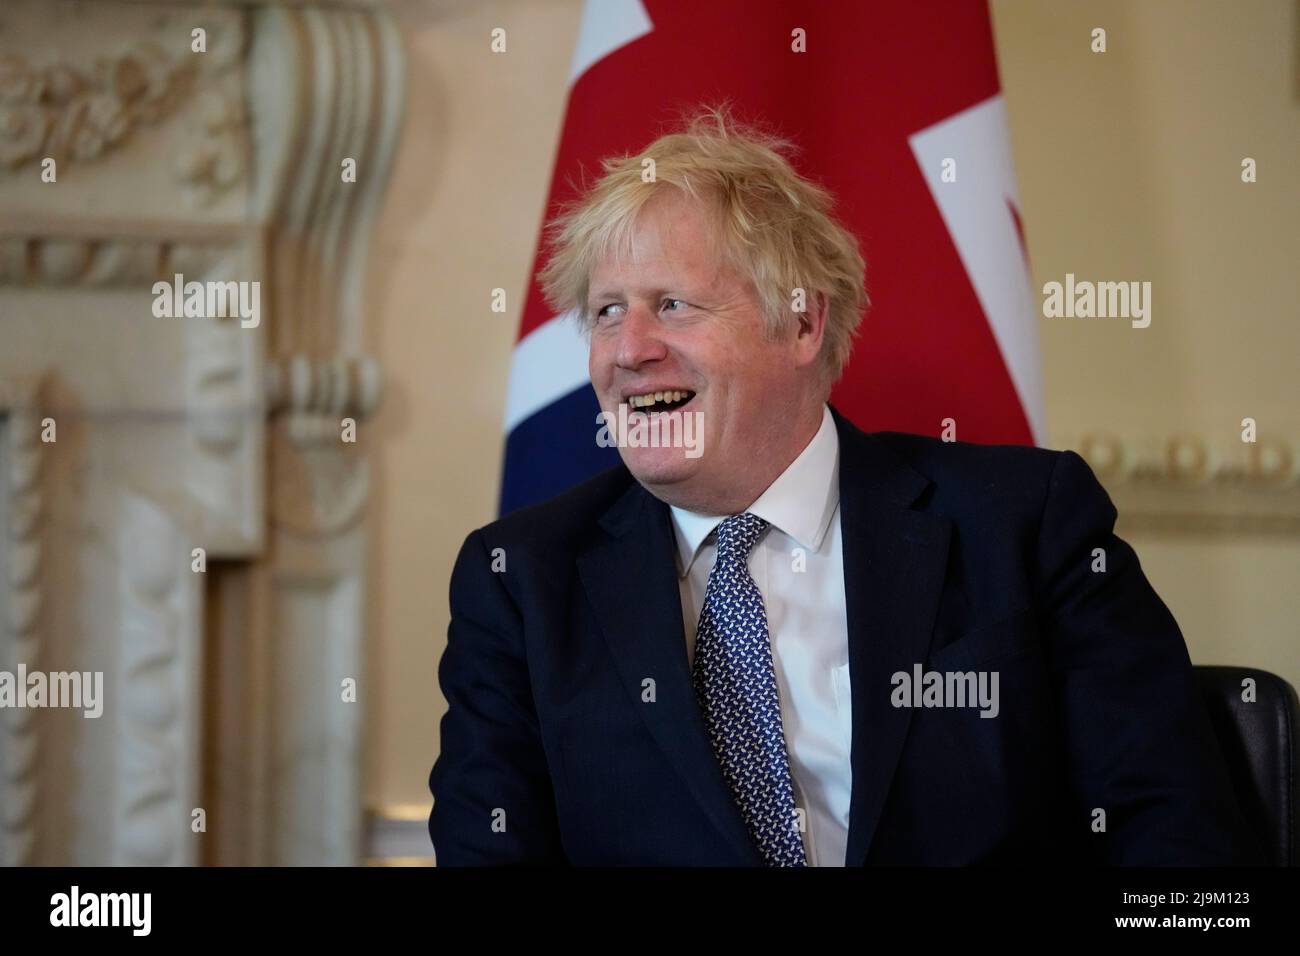 Prime Minister Boris Johnson listens to the Emir of Qatar, Sheikh Tamim bin Hamad Al Thani, at the start of their meeting in 10 Downing Street, London. Picture date: Tuesday May 24, 2022. Stock Photo